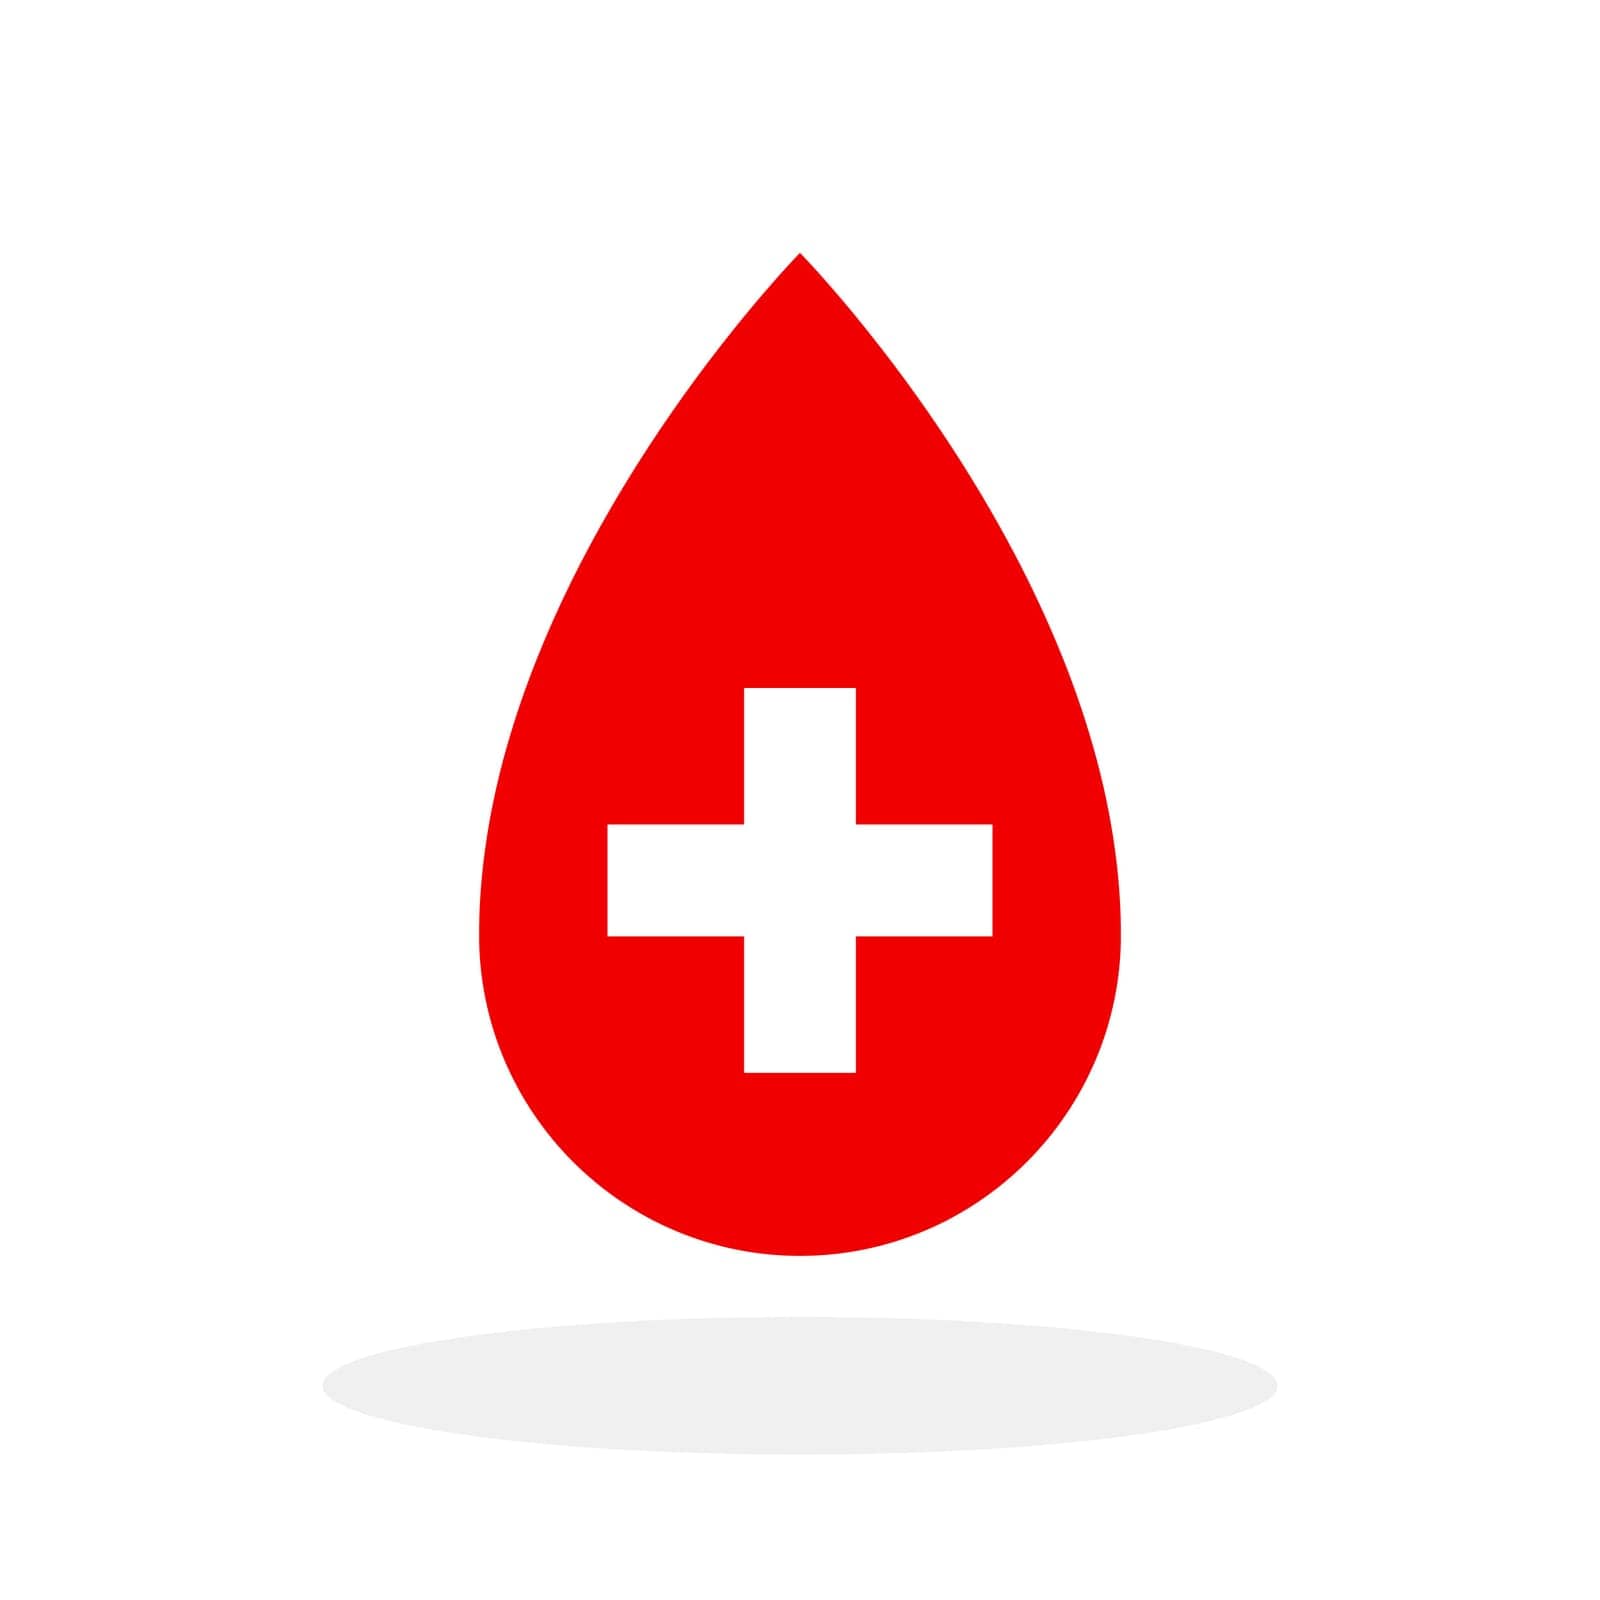 Blood drop icon. Blood donation concept. Red blood drop symbol by Chekman